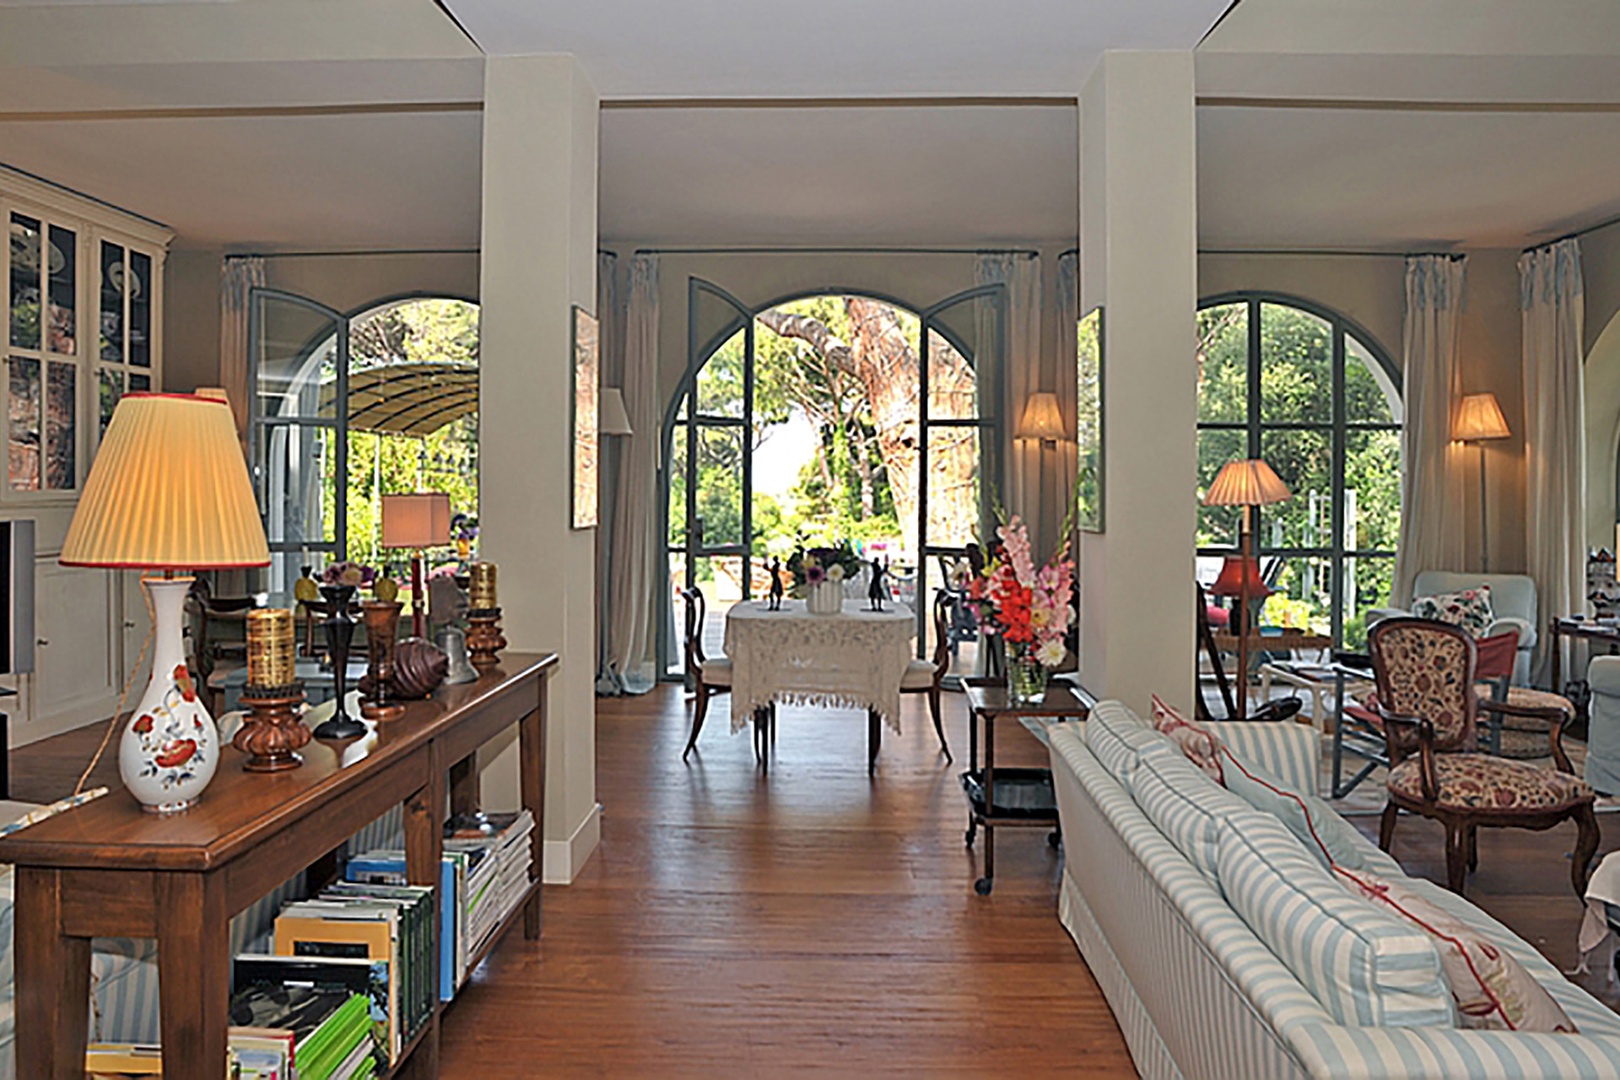 Gracefully arched windows on two sides of the living room bring the outside in.